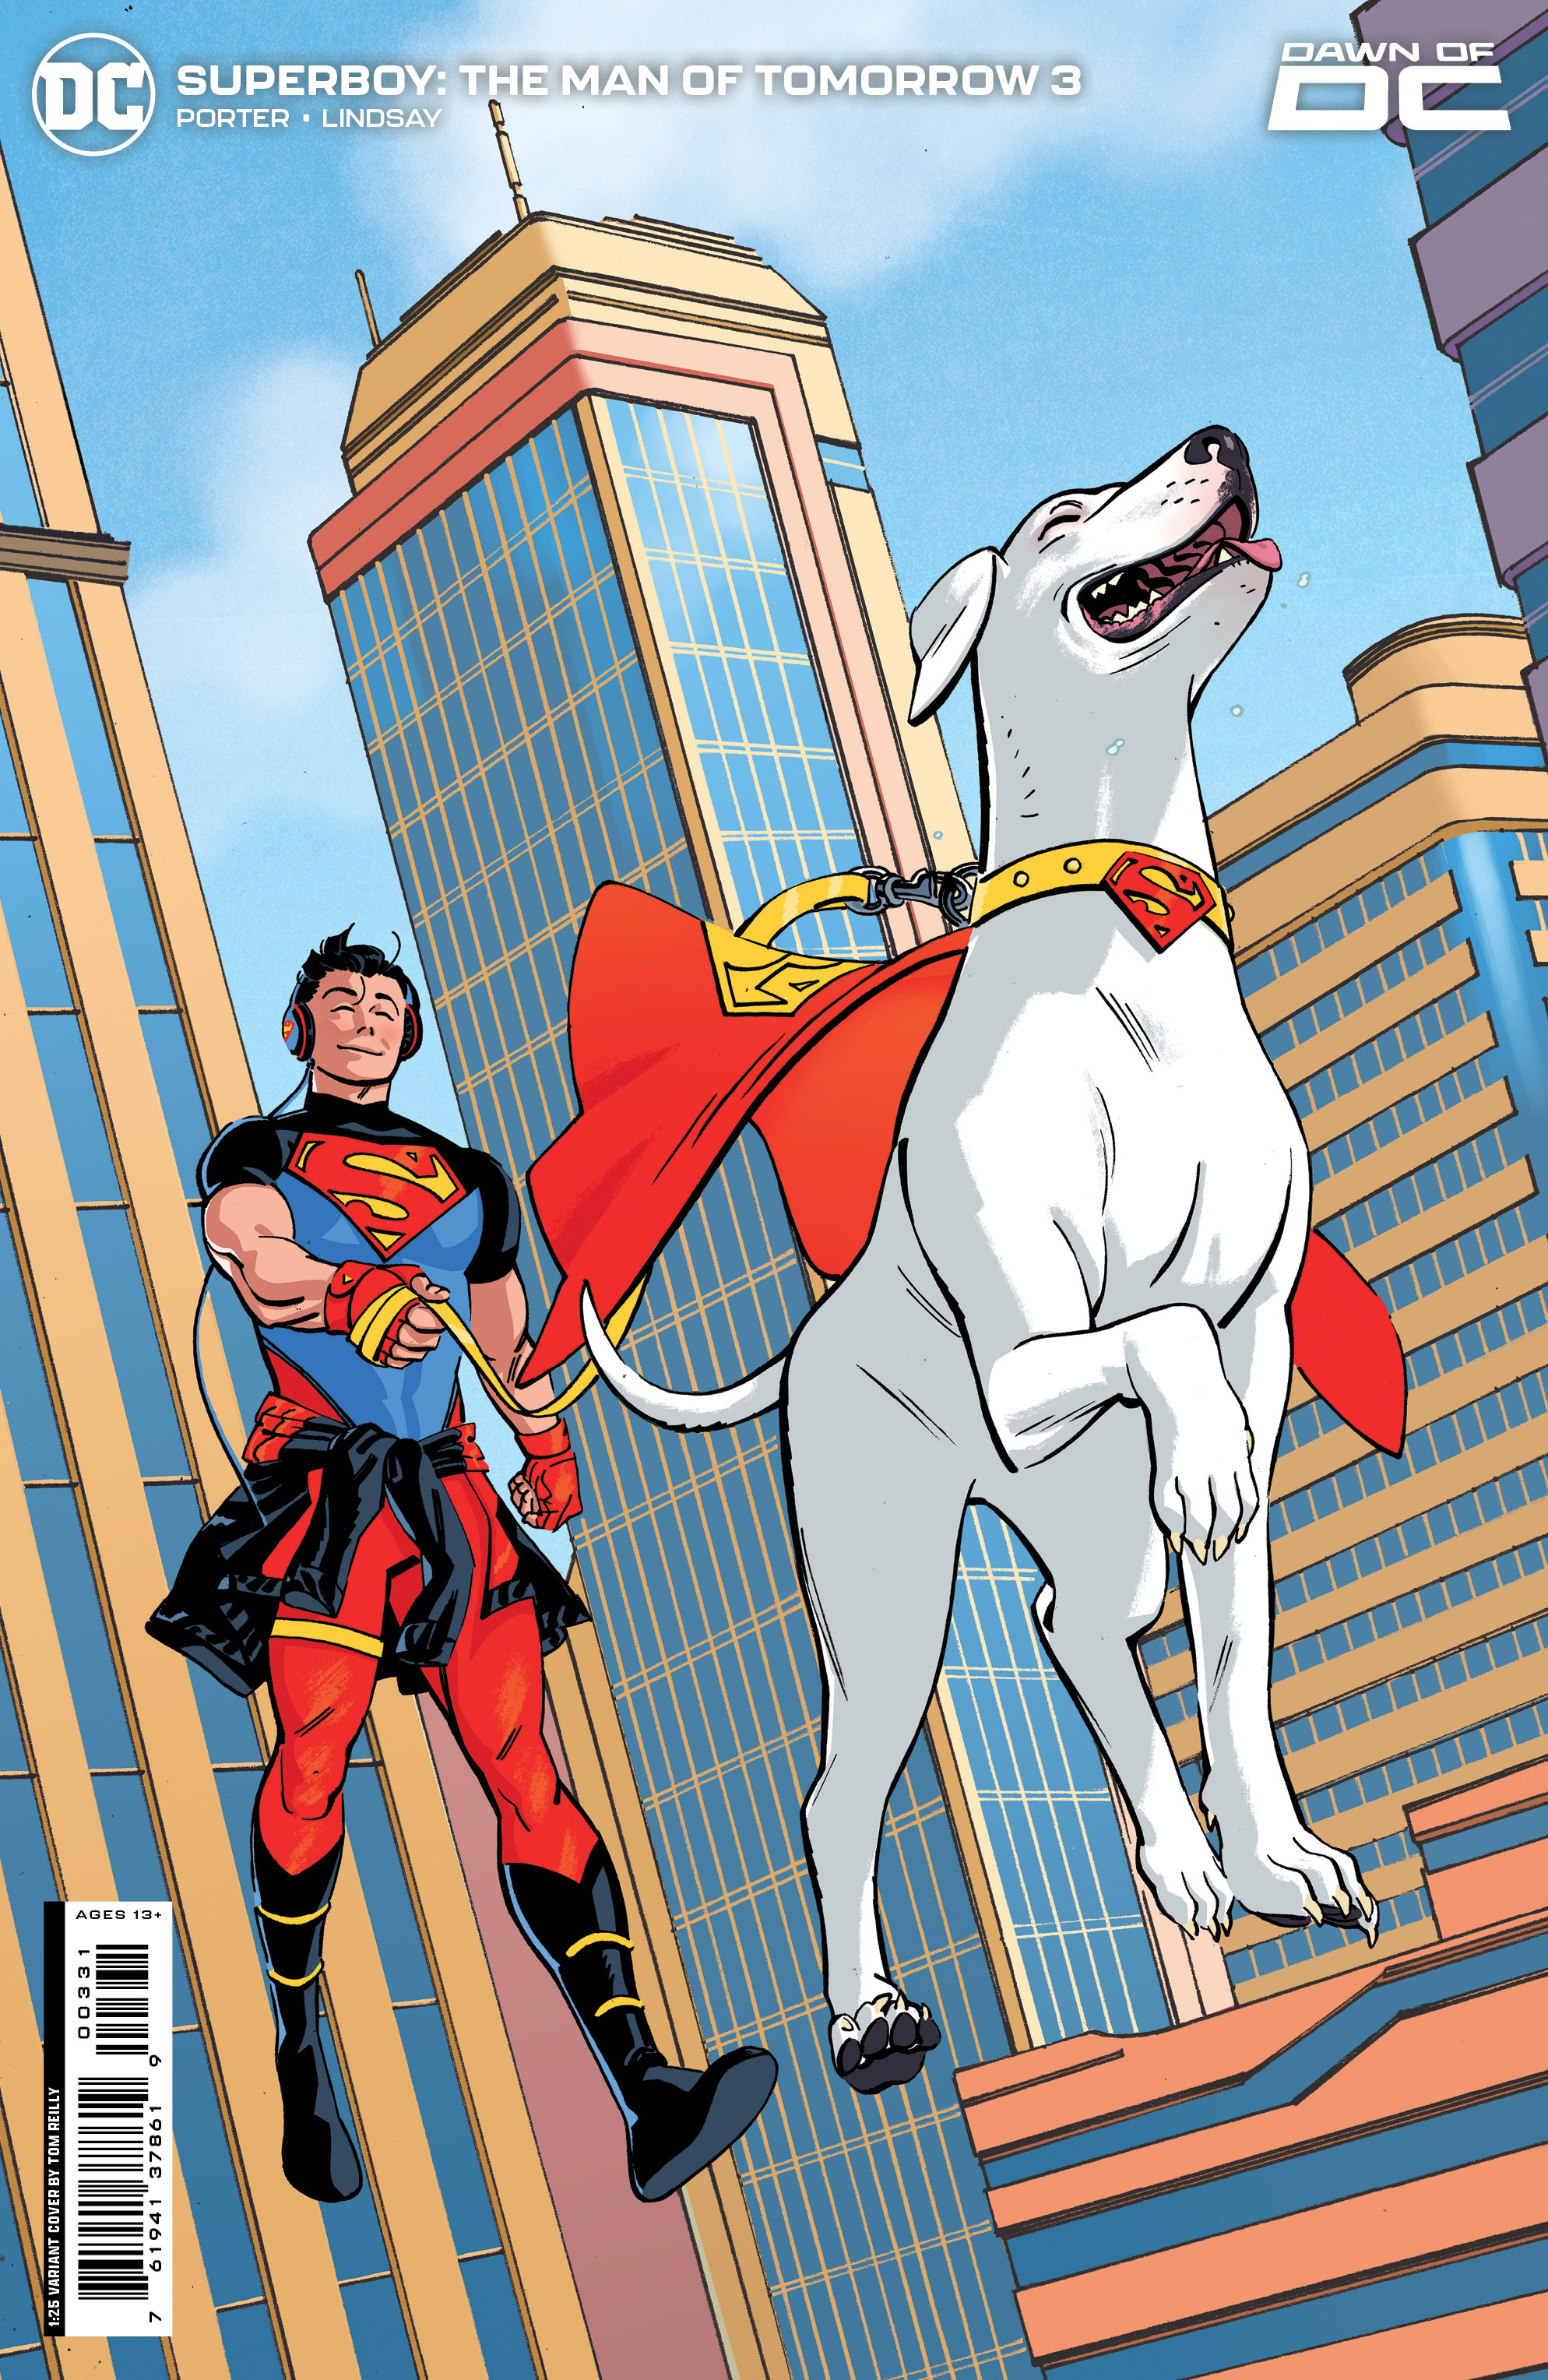 Superboy The Man of Tomorrow #3 Cover C 1 for 25 Incentive Tom Reilly Card Stock Variant (Of 6)